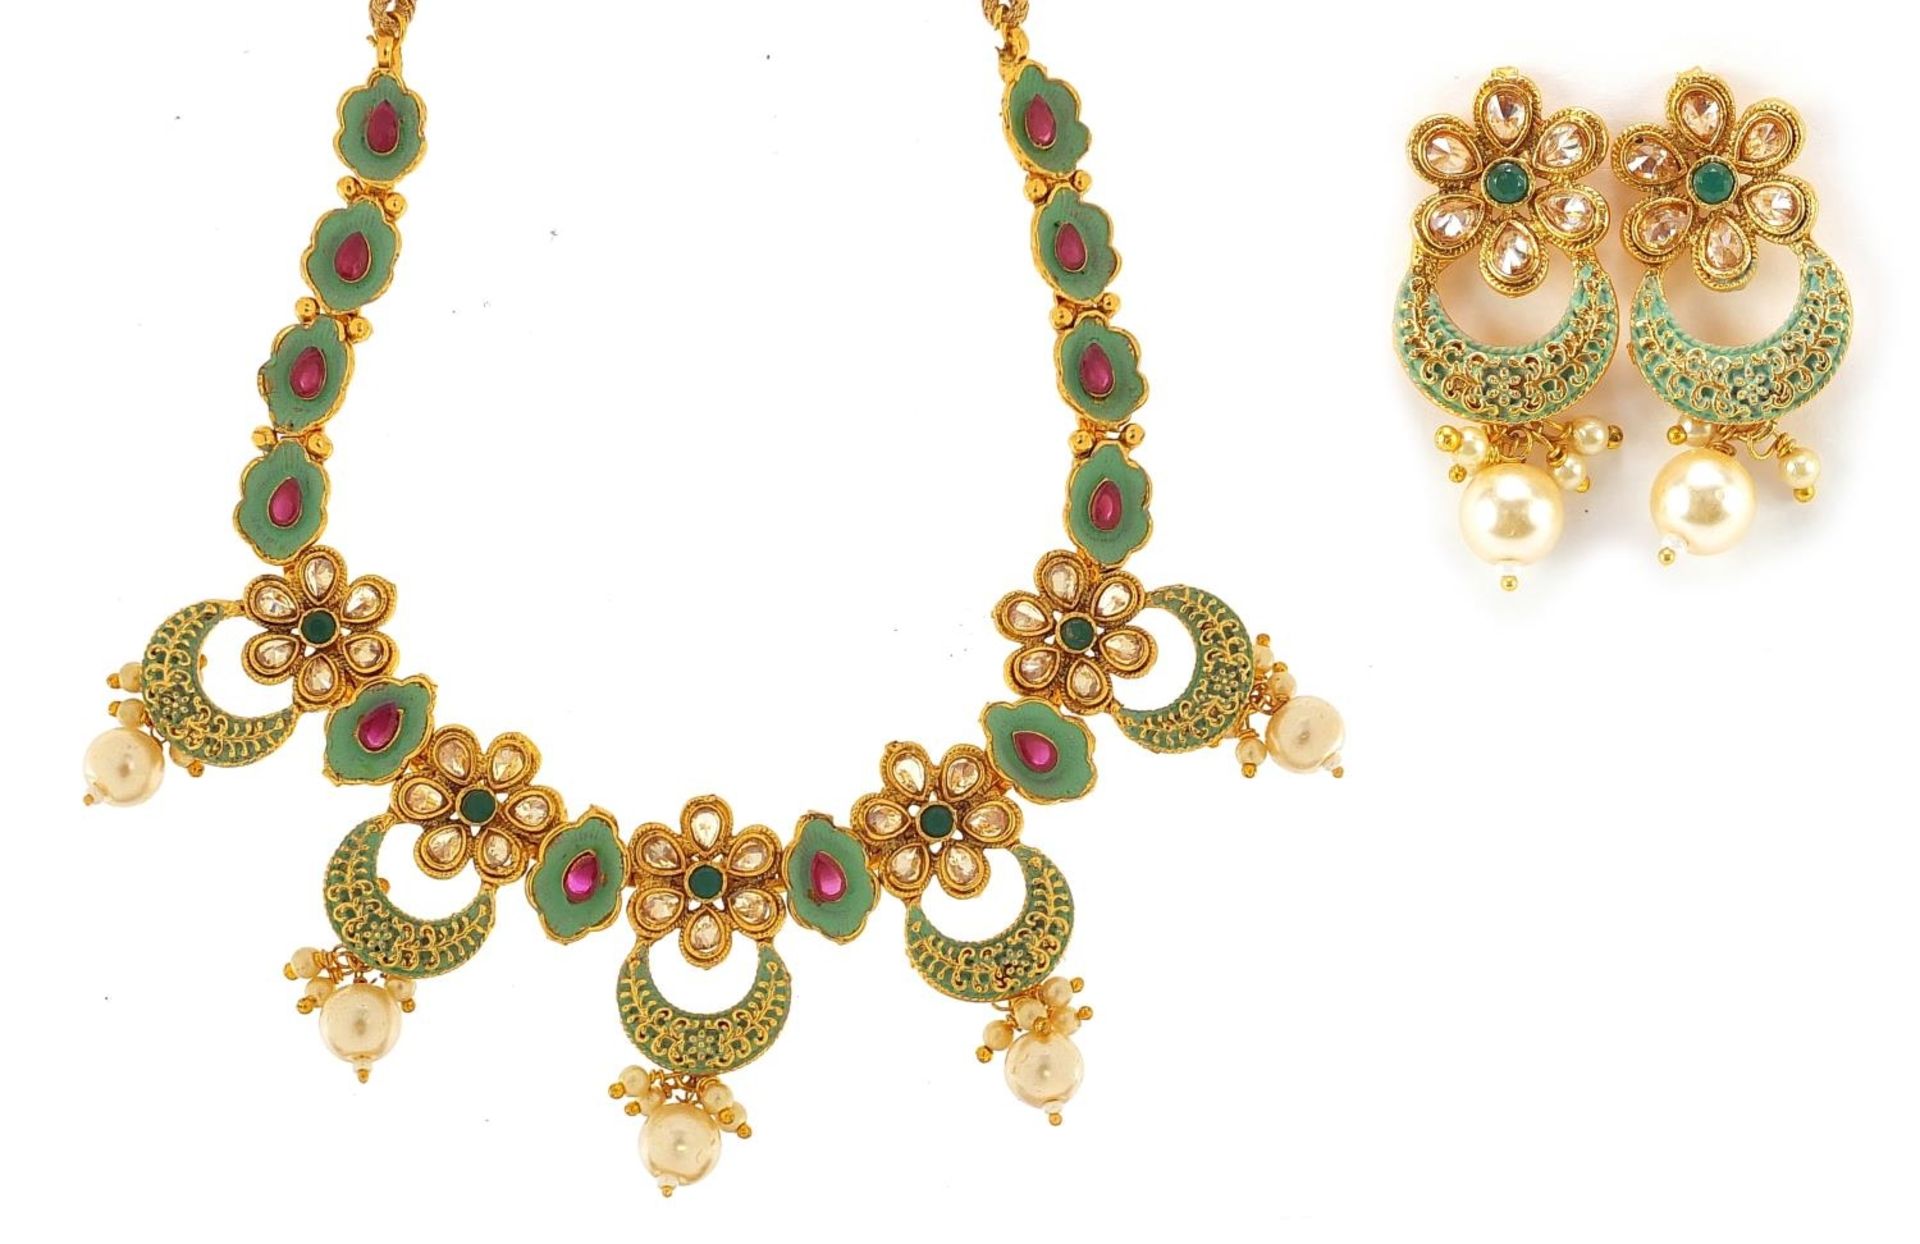 Islamic gilt metal, enamel and beadwork necklace with matching earrings, the necklace 80cm in length